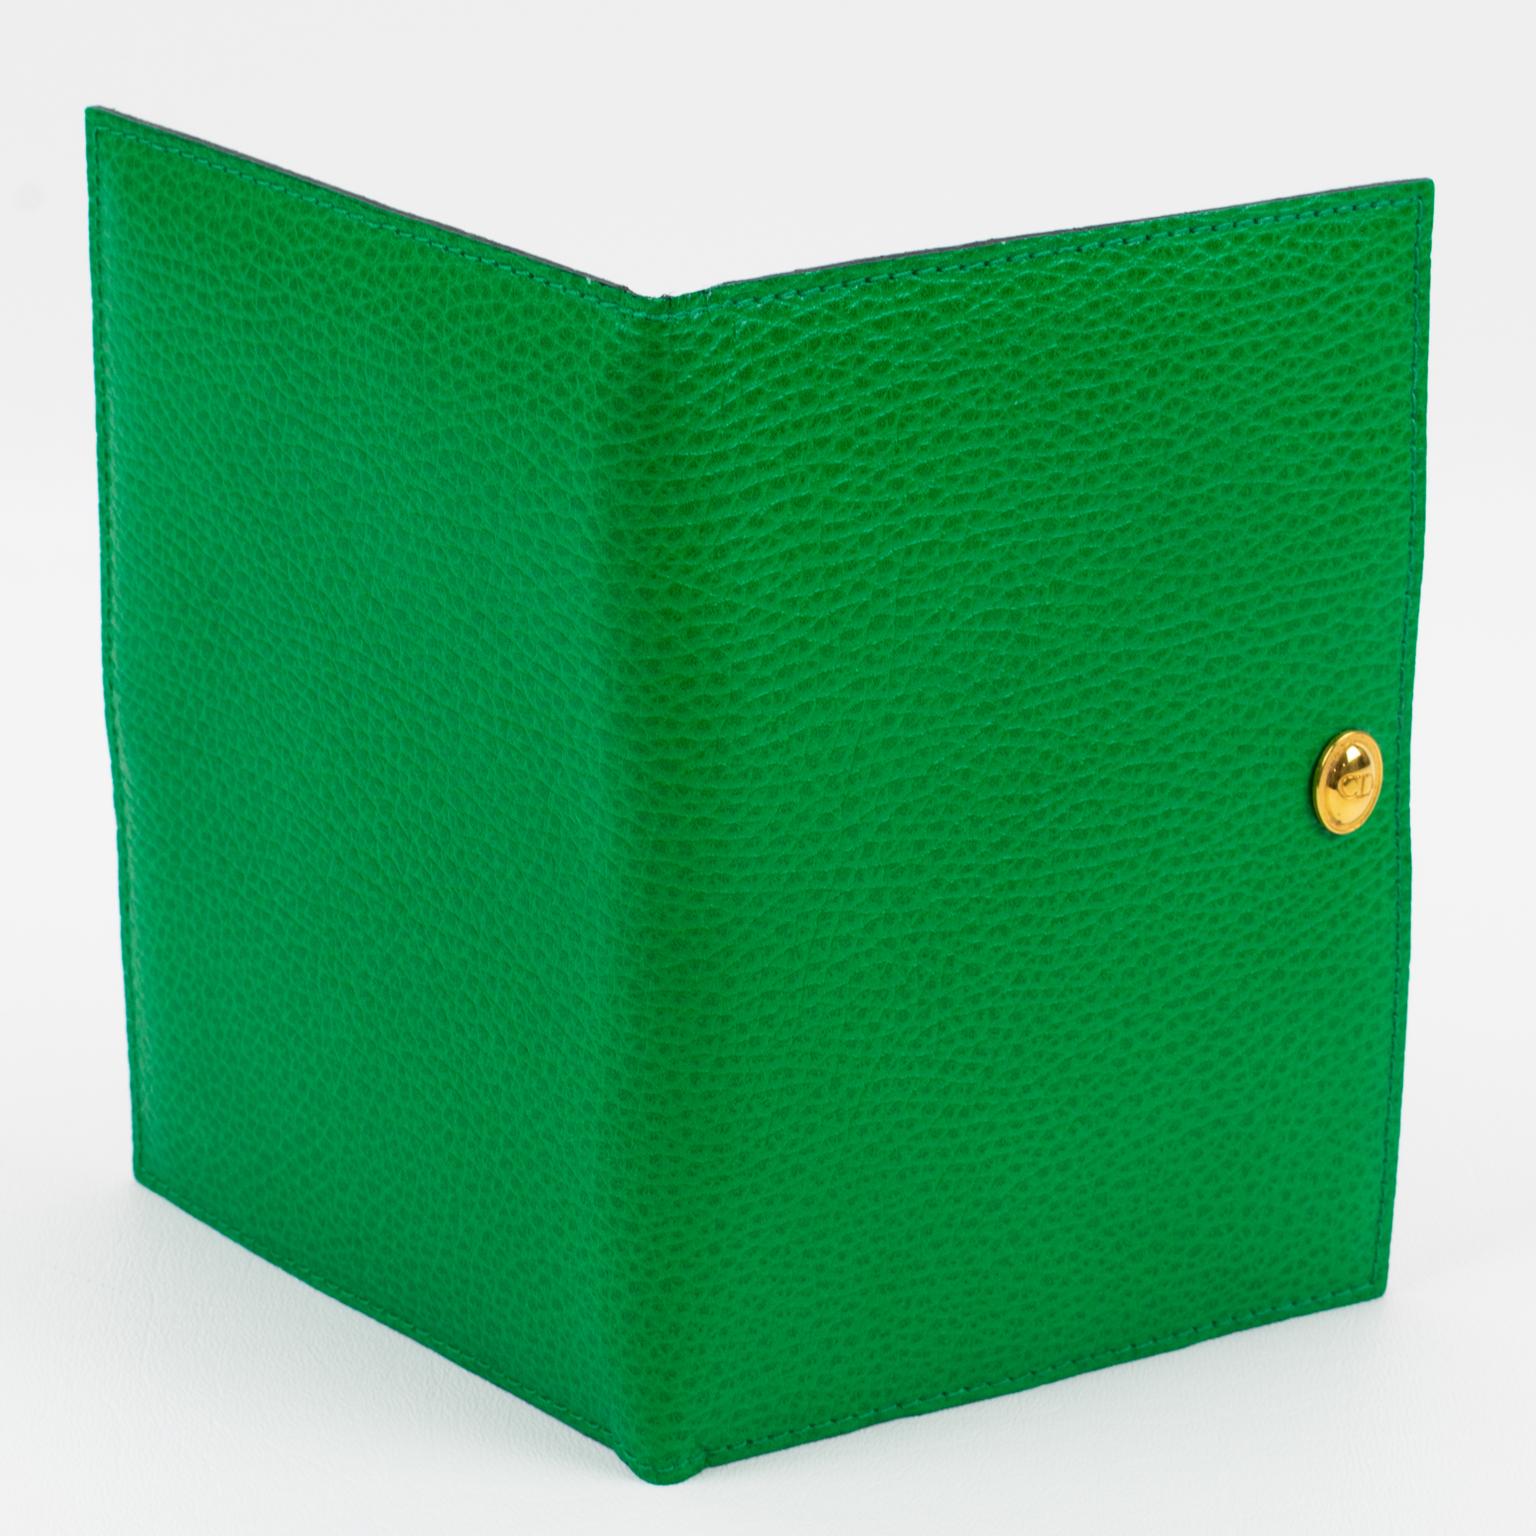 Christian Dior designed this sophisticated leather picture photo frame for its Home Collection in the 1990s. The lovely bright green leather with a pattern has a hand-stitched finish, all around. This double-view folding wallet-shaped frame is